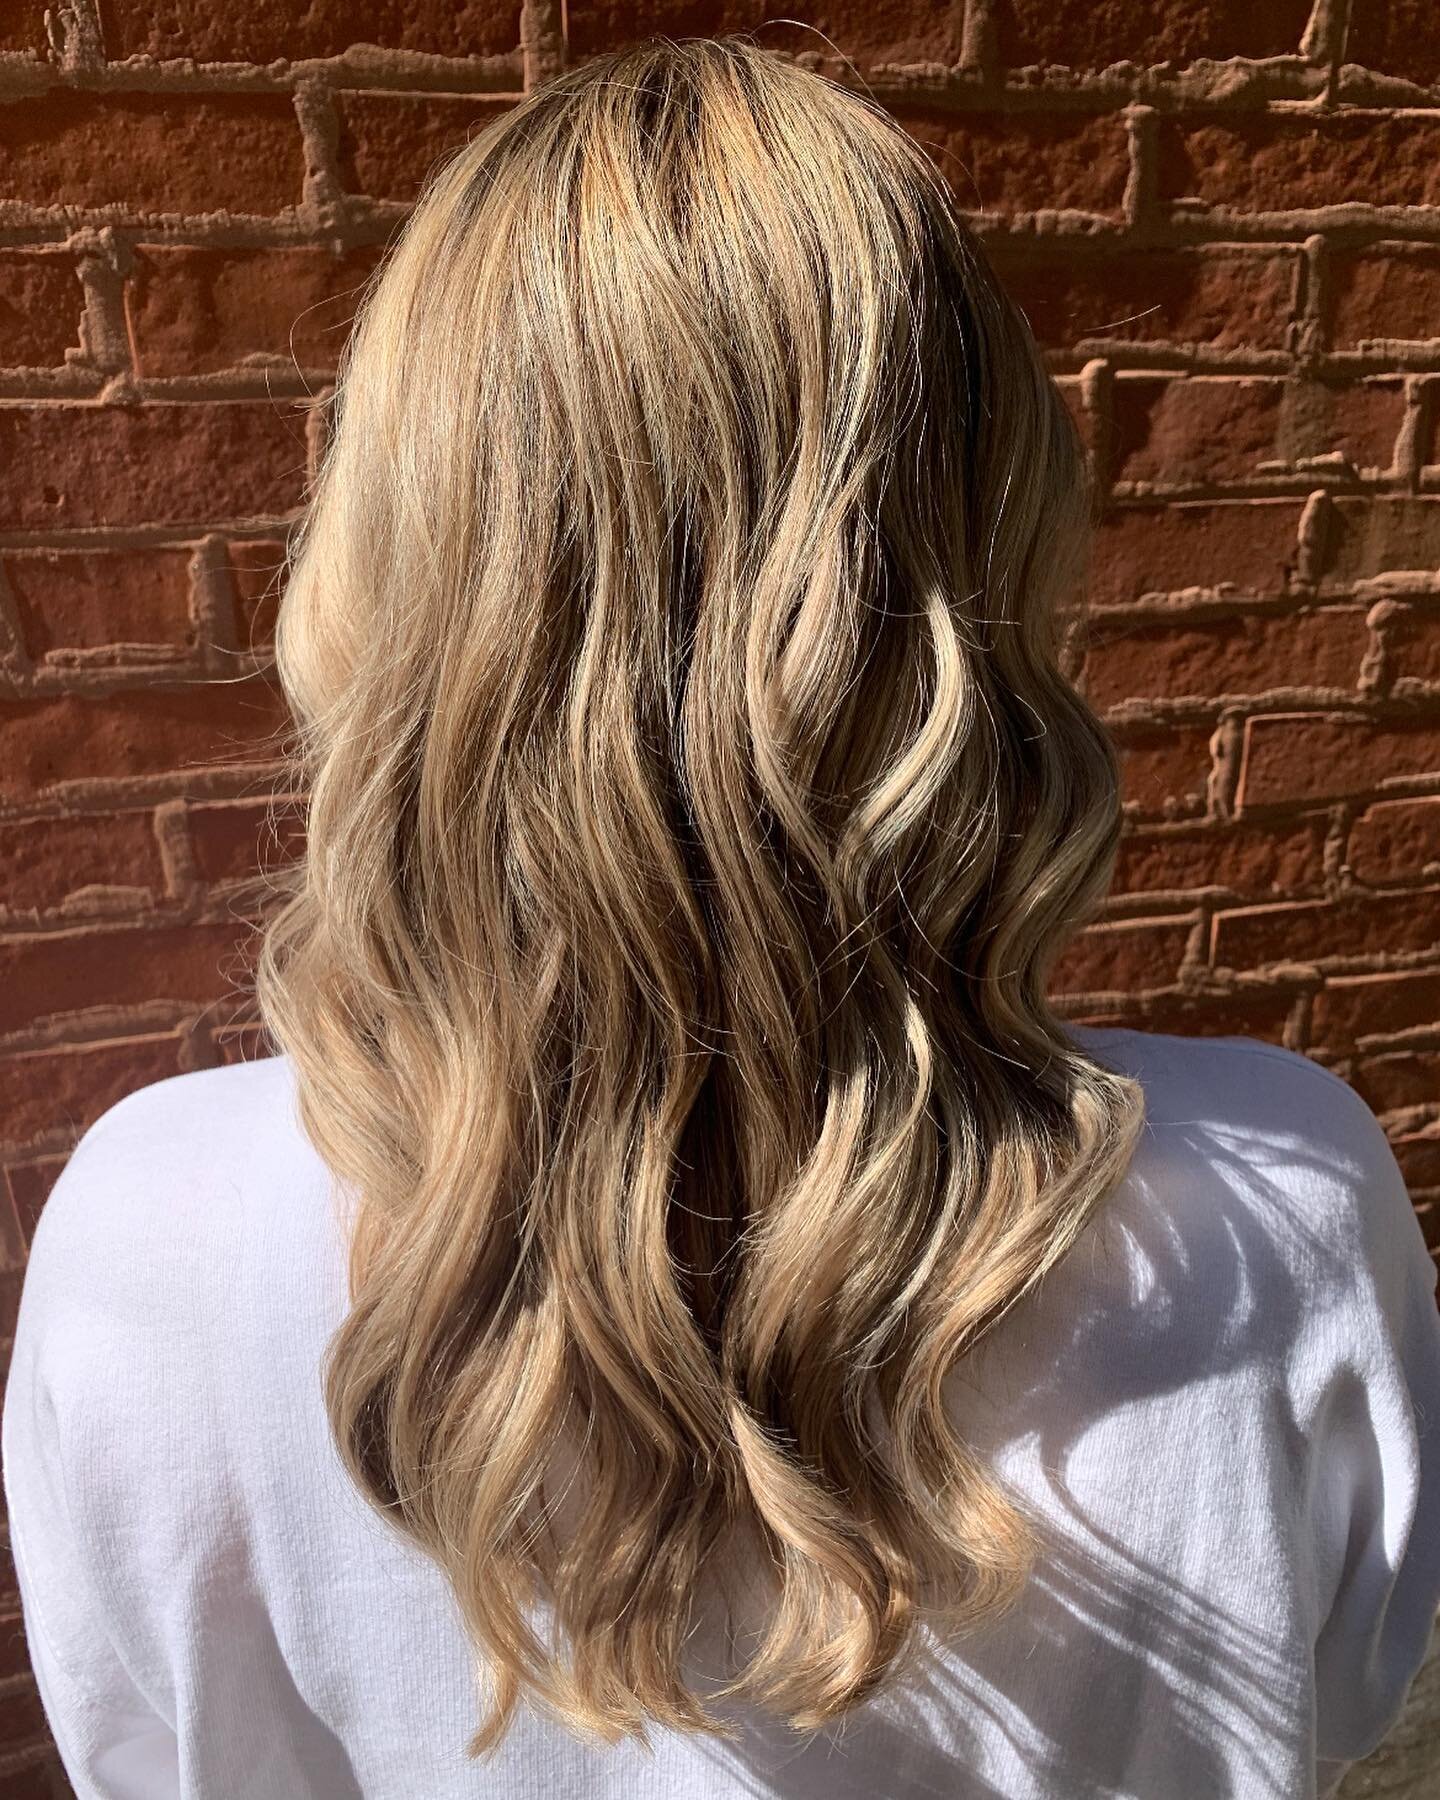 Change is in the hair!@miss_rachel_casey 
added lowlights to give this blonde a refresh for Fall! 🍂💁🏼&zwj;♀️

#rksalonchicago #chicagosalon #chicagohair #chicagohairstylist #chicago #boystownchicago #northalsted #wrigleyville #lakeviewchicago 
#am